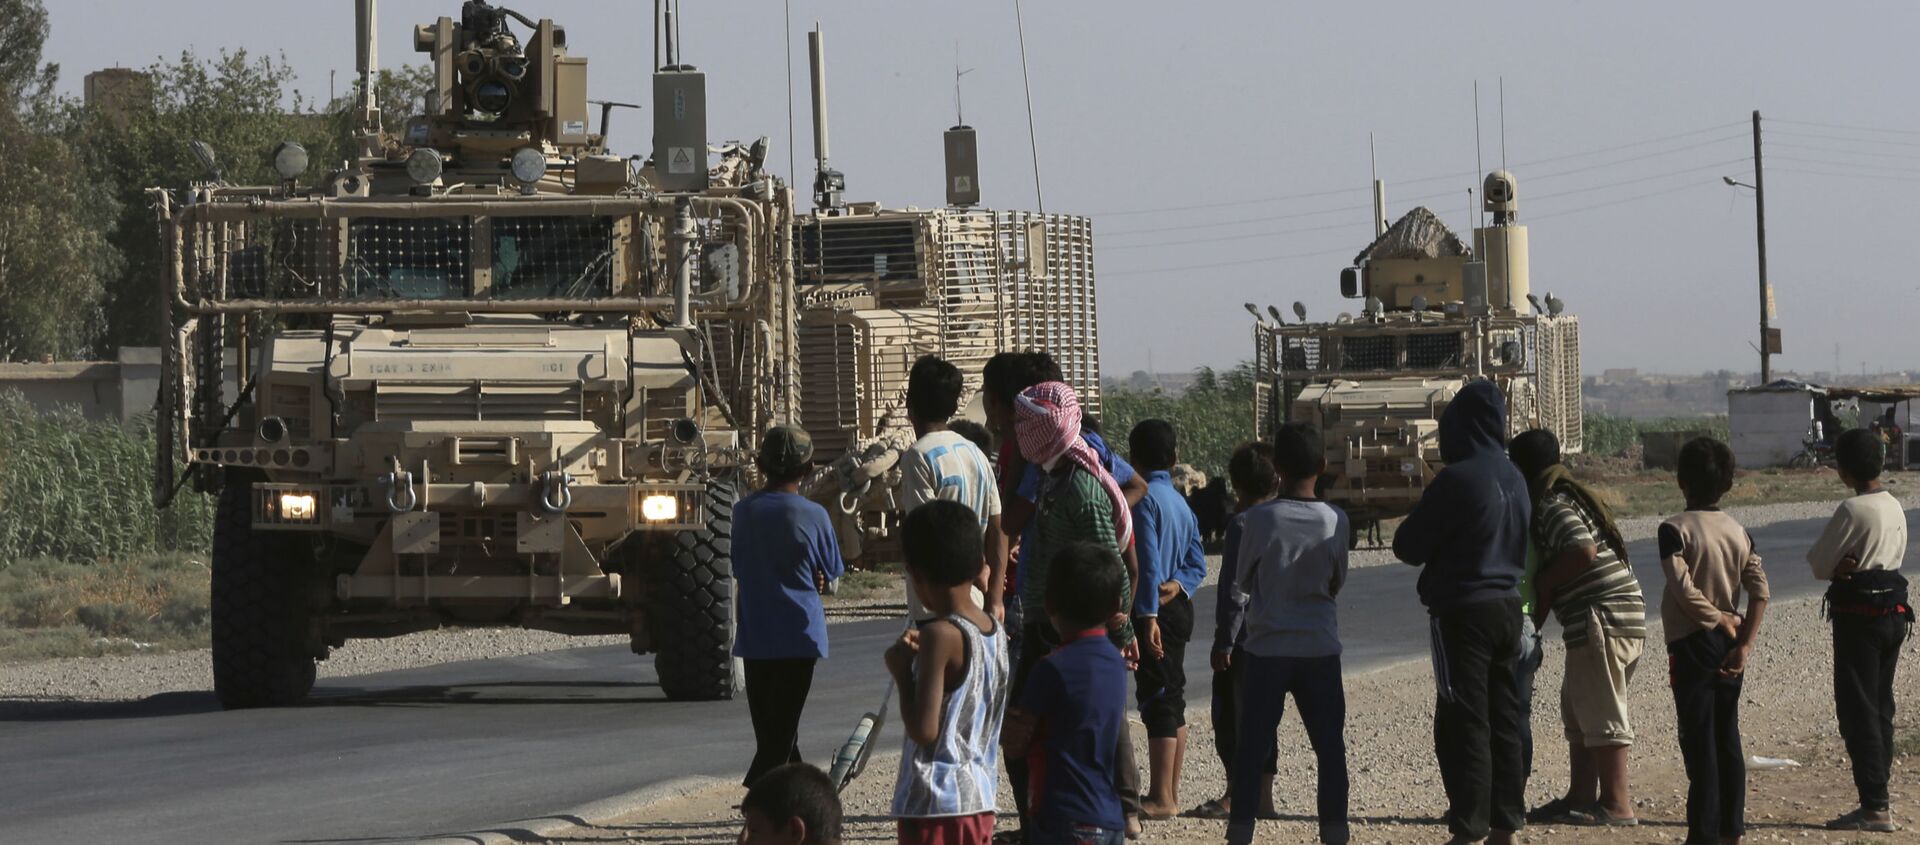  In this July 26, 2017 file photo, Syrian children and youths gather on a street as they look at a U.S. armored vehicle convoy pass on a road that links to Raqqa, northeast Syria. - Sputnik International, 1920, 14.03.2021